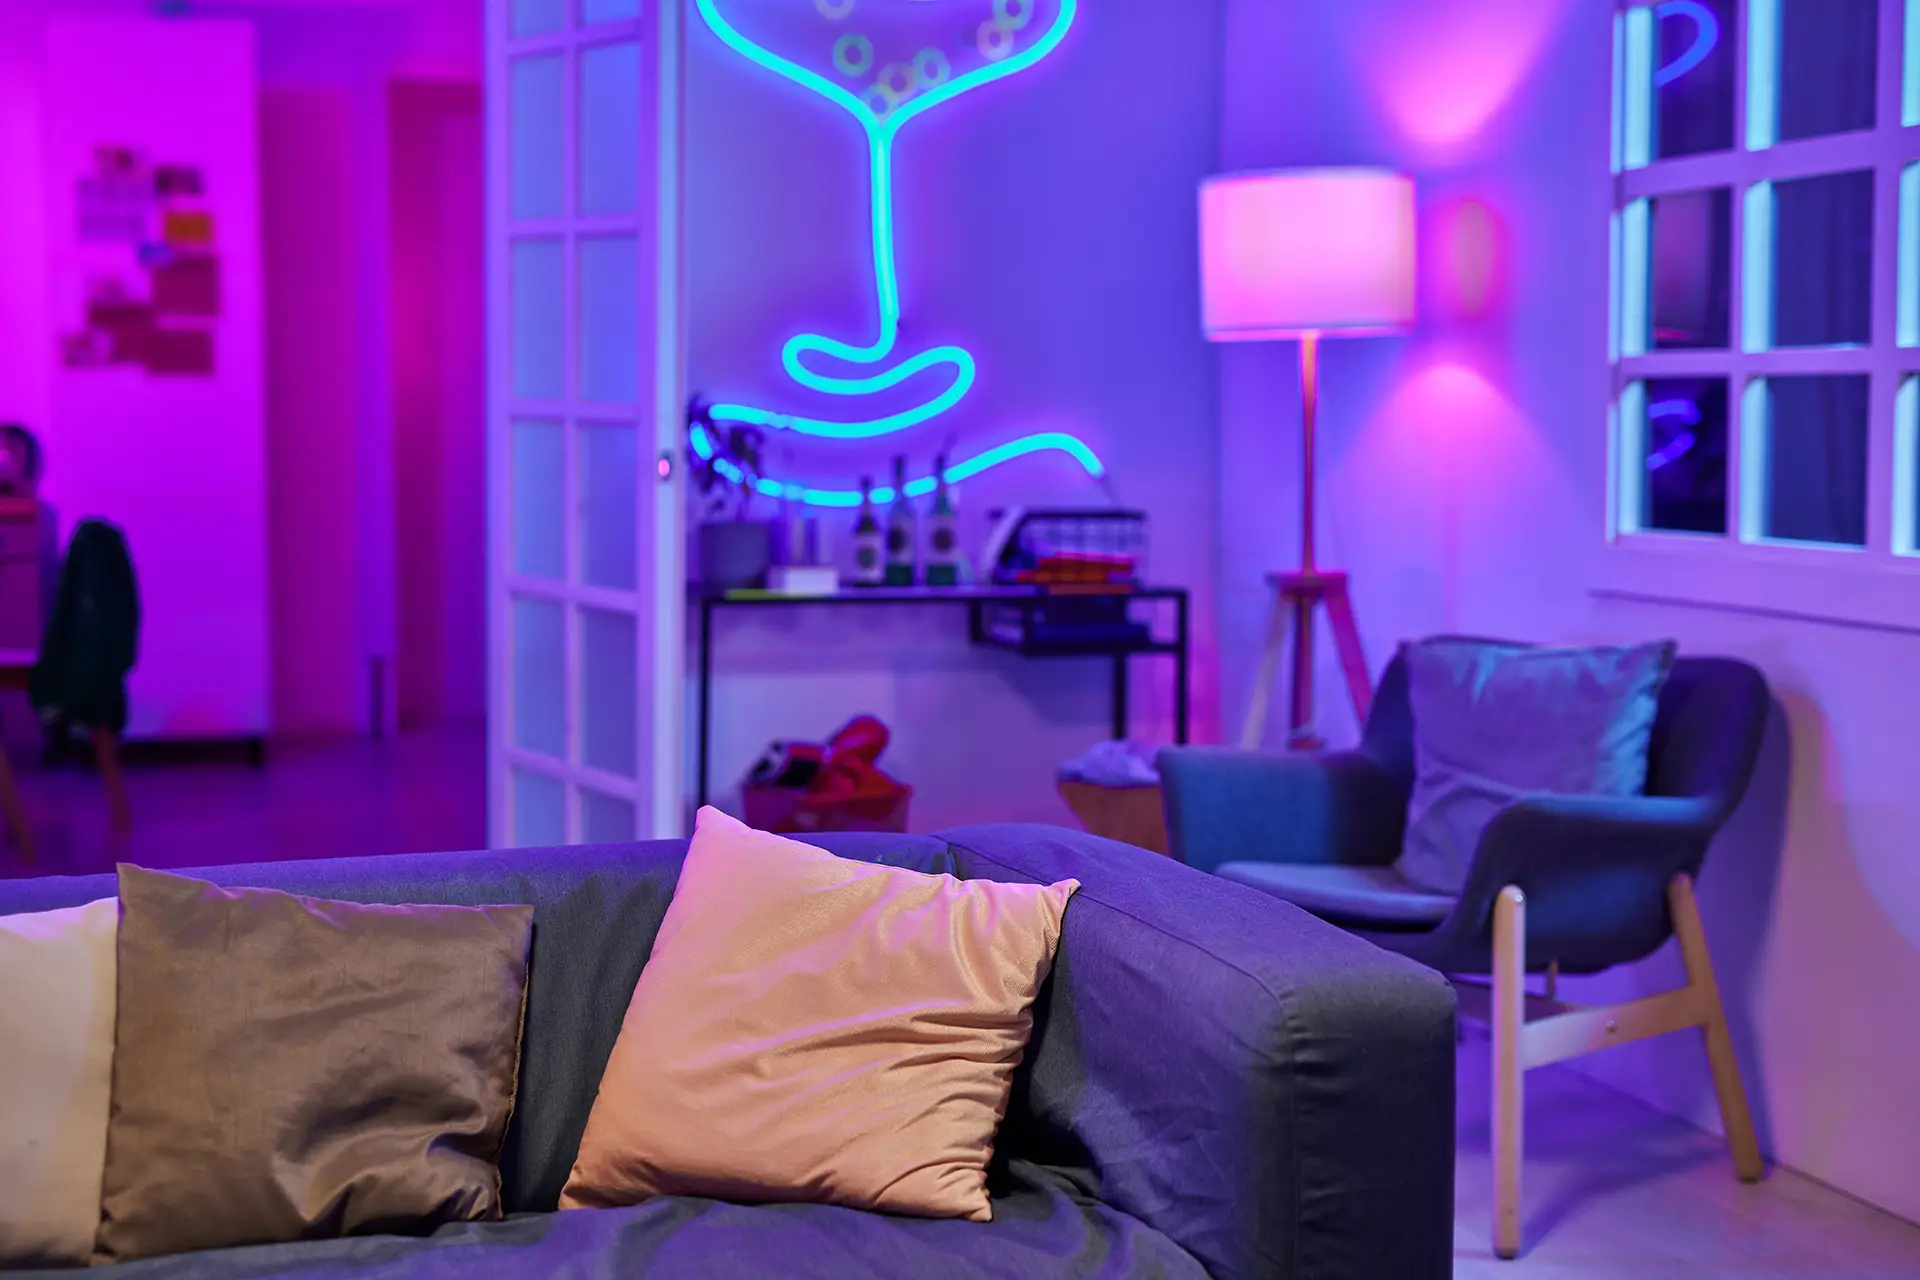 A cozy living room with gray and gold pillows on a couch. A neon light in the shape of a face decorates the wall above a shelf with books and bottles. A gray armchair and a lit floor lamp stand next to a window, illuminated by pink and blue lights.